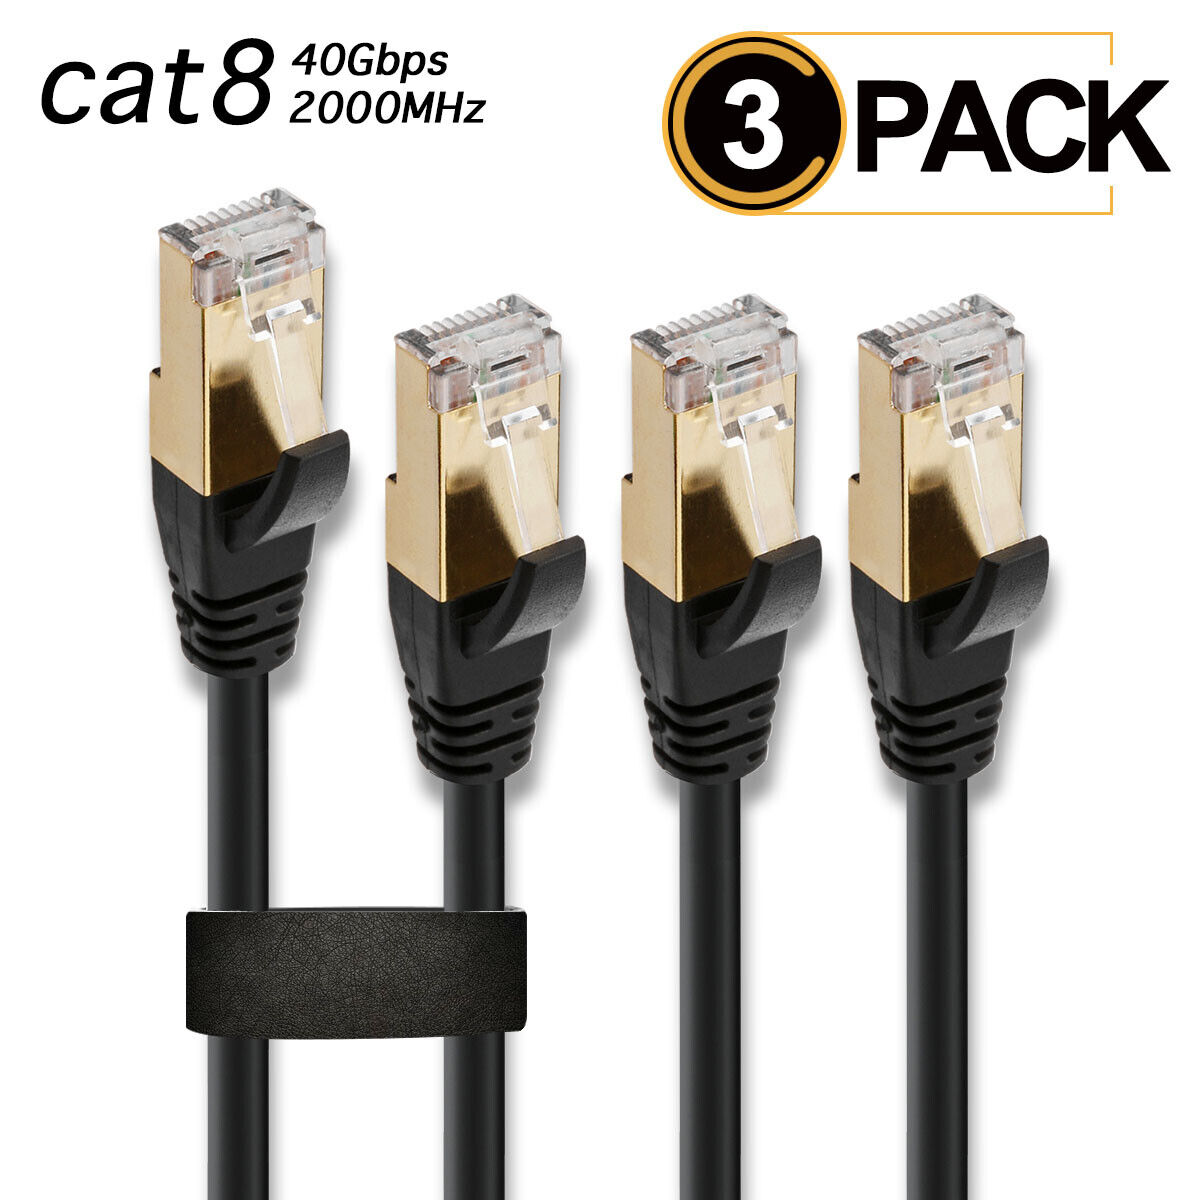 CAT 8 Ethernet Cable, 3ft (3 Pack) Network Cord with Gold Plated RJ45 Connector